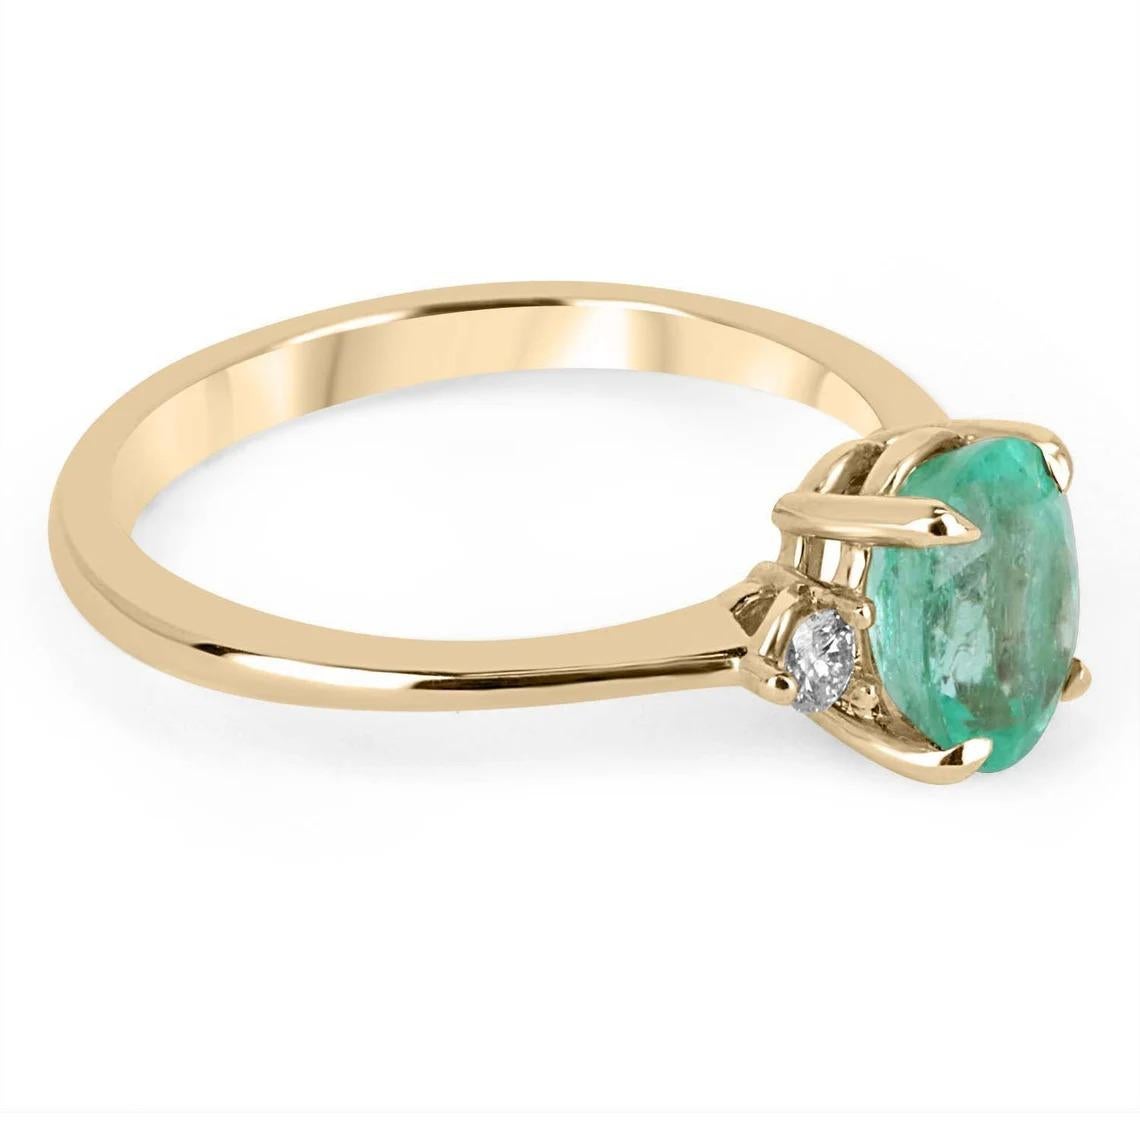 A classic Colombian emerald and diamond three-stone ring. Dexterously crafted in gleaming 14K gold this ring features a 2.20-carat natural Colombian emerald-oval cut from the famous Chivor mines. Set in a secure prong setting, this extraordinary